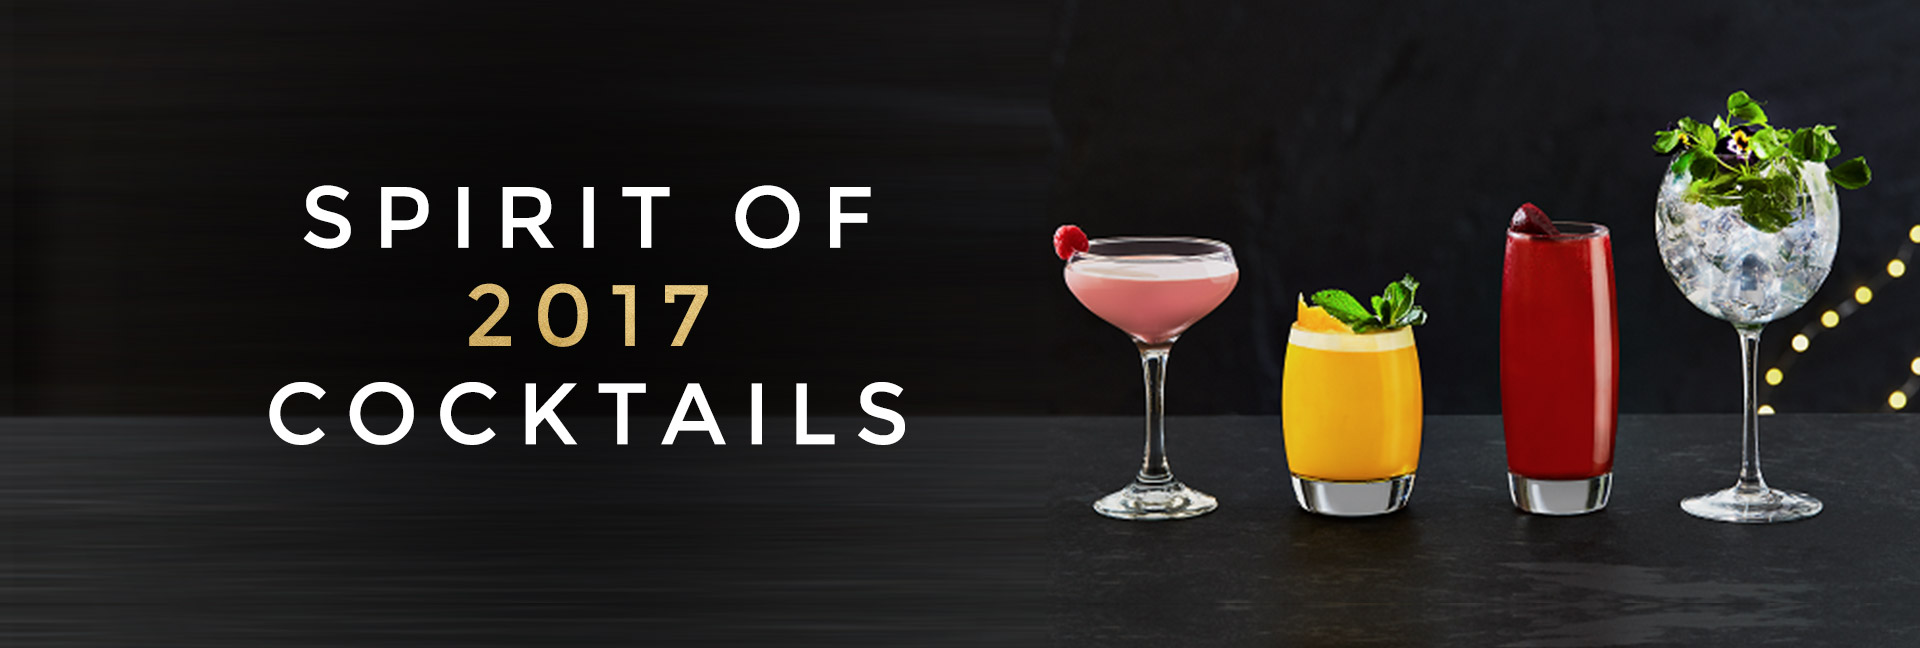 Spirit of 2017 cocktails at All Bar One Cannon Street